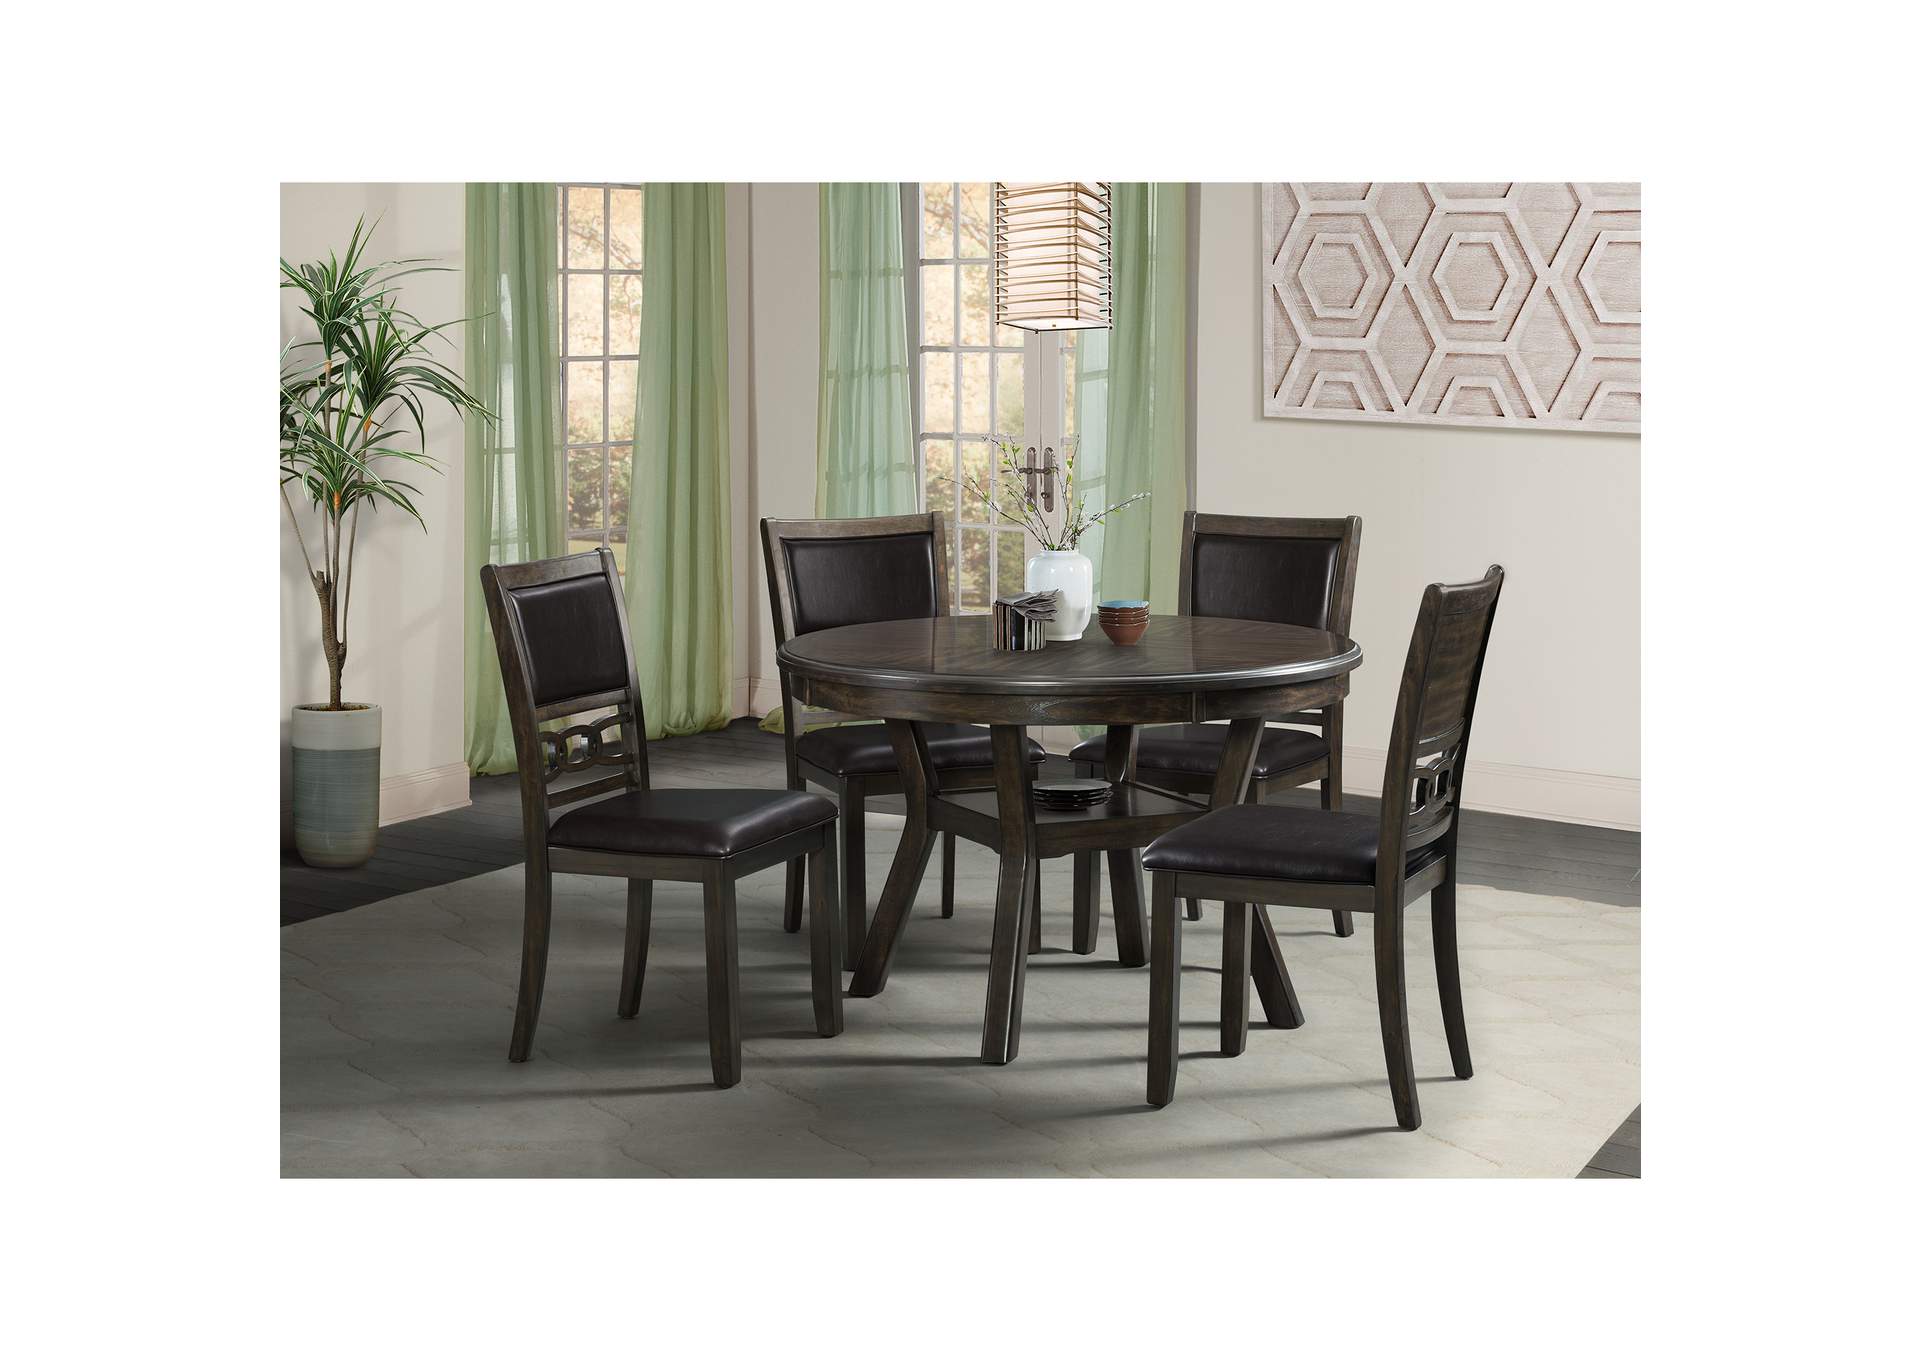 Amherst Dining Table With Wood Leg Dark Finish,Elements